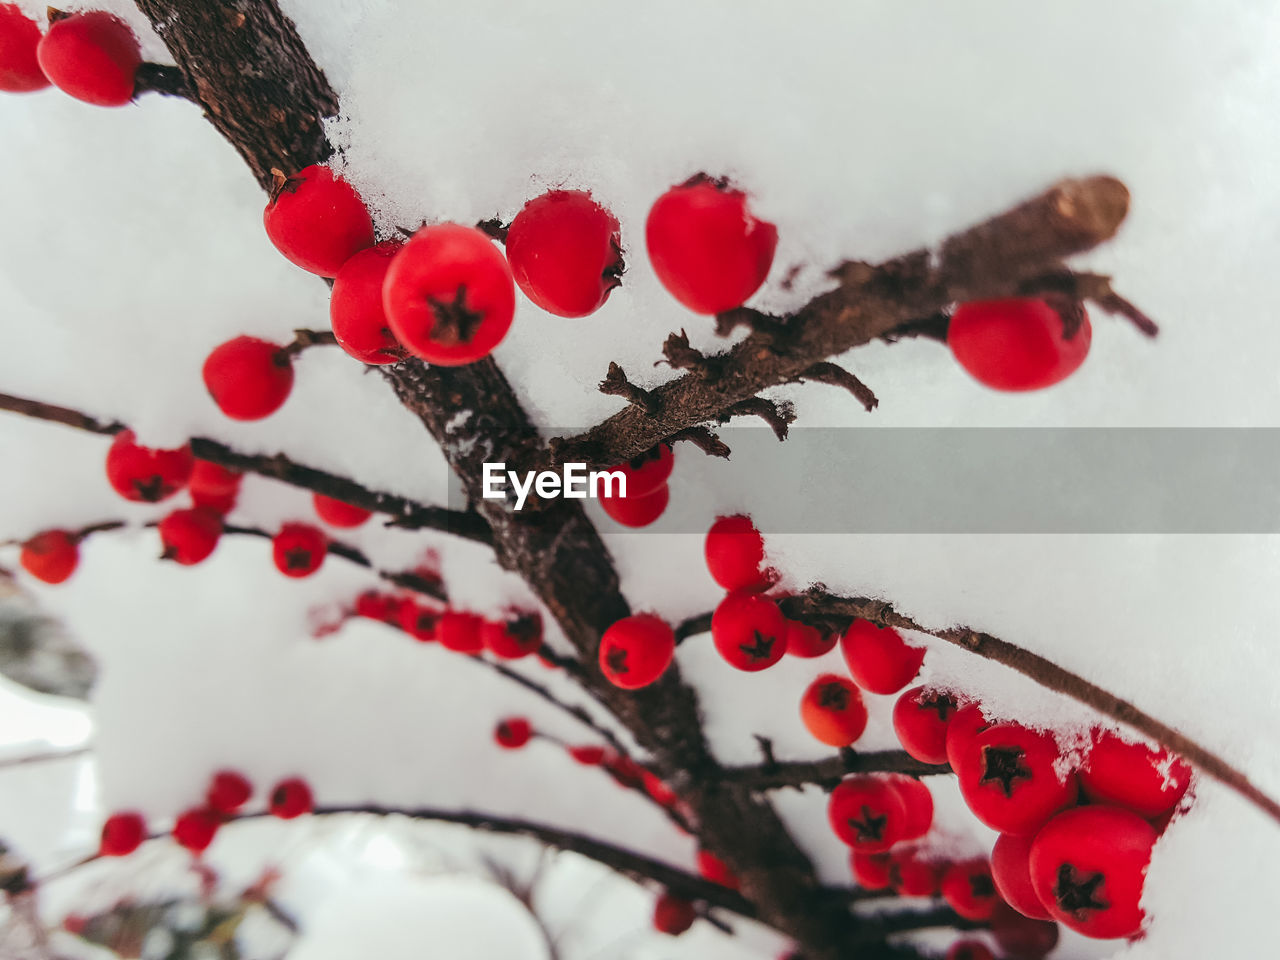 CLOSE-UP OF FROZEN BRANCH